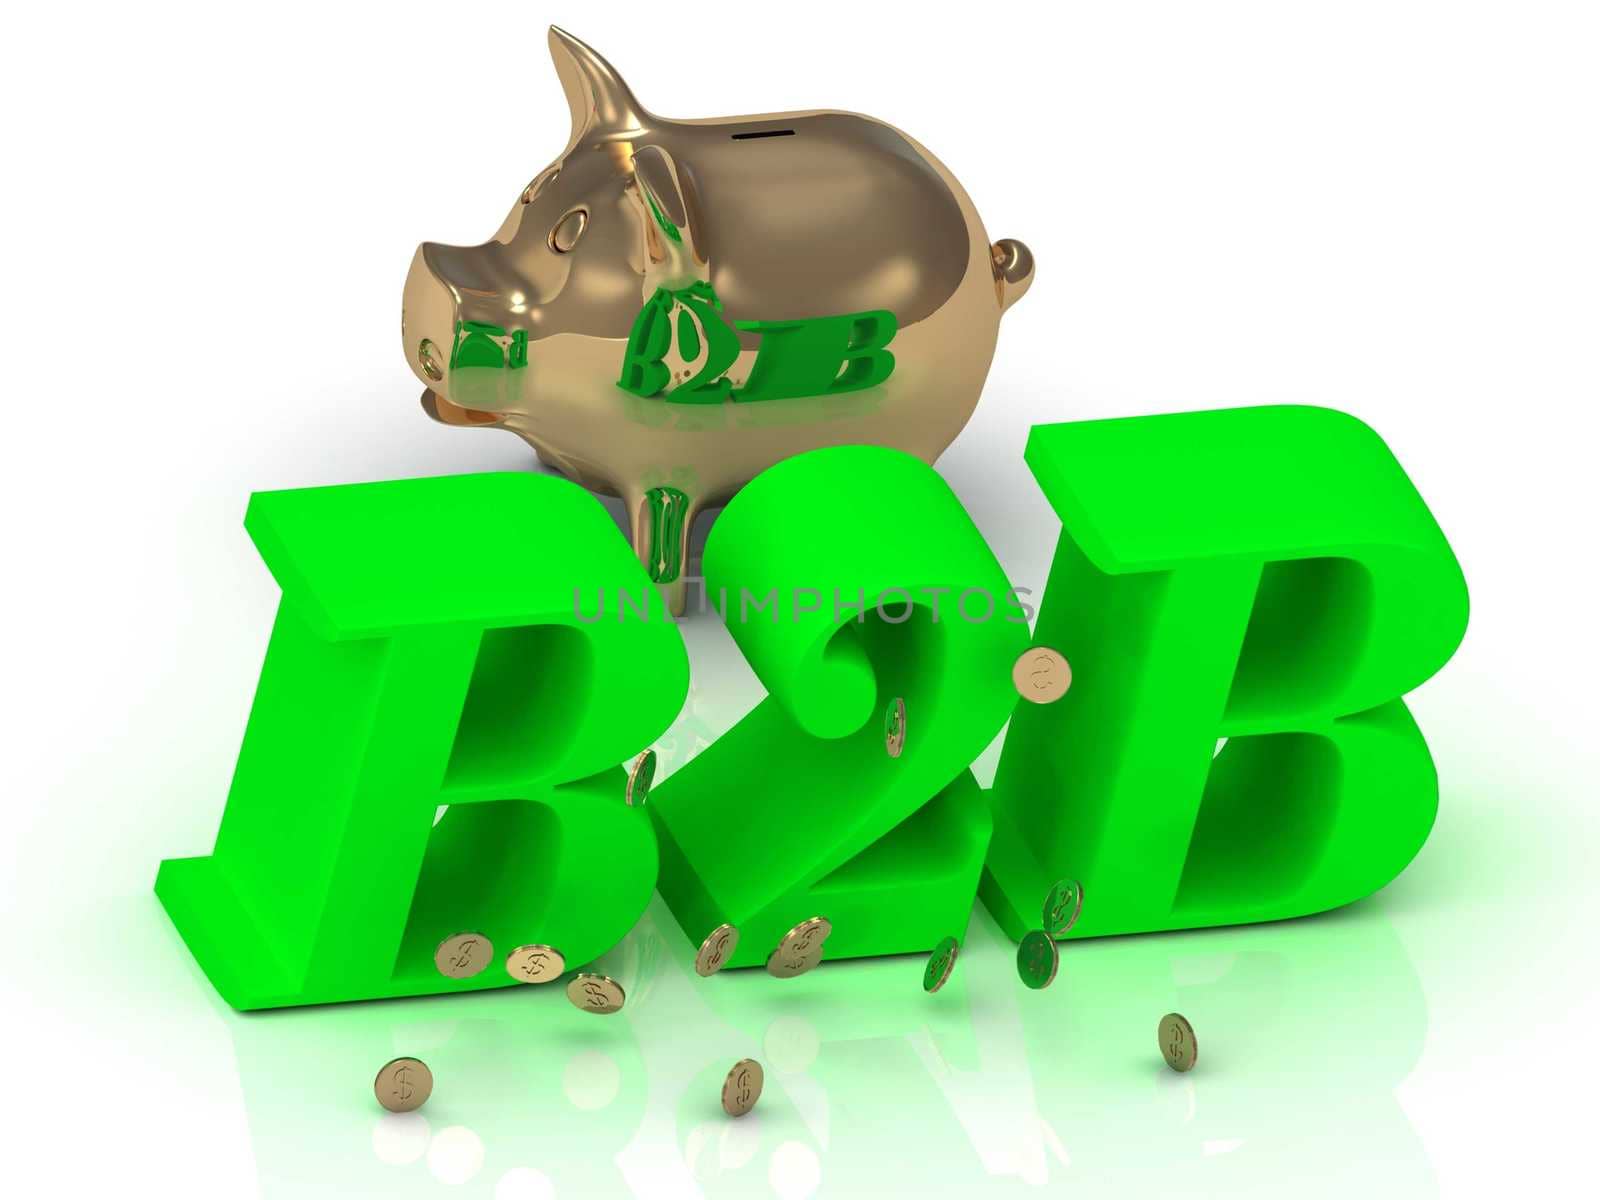 B2B - big bright green word, gold Piggy and money on white background